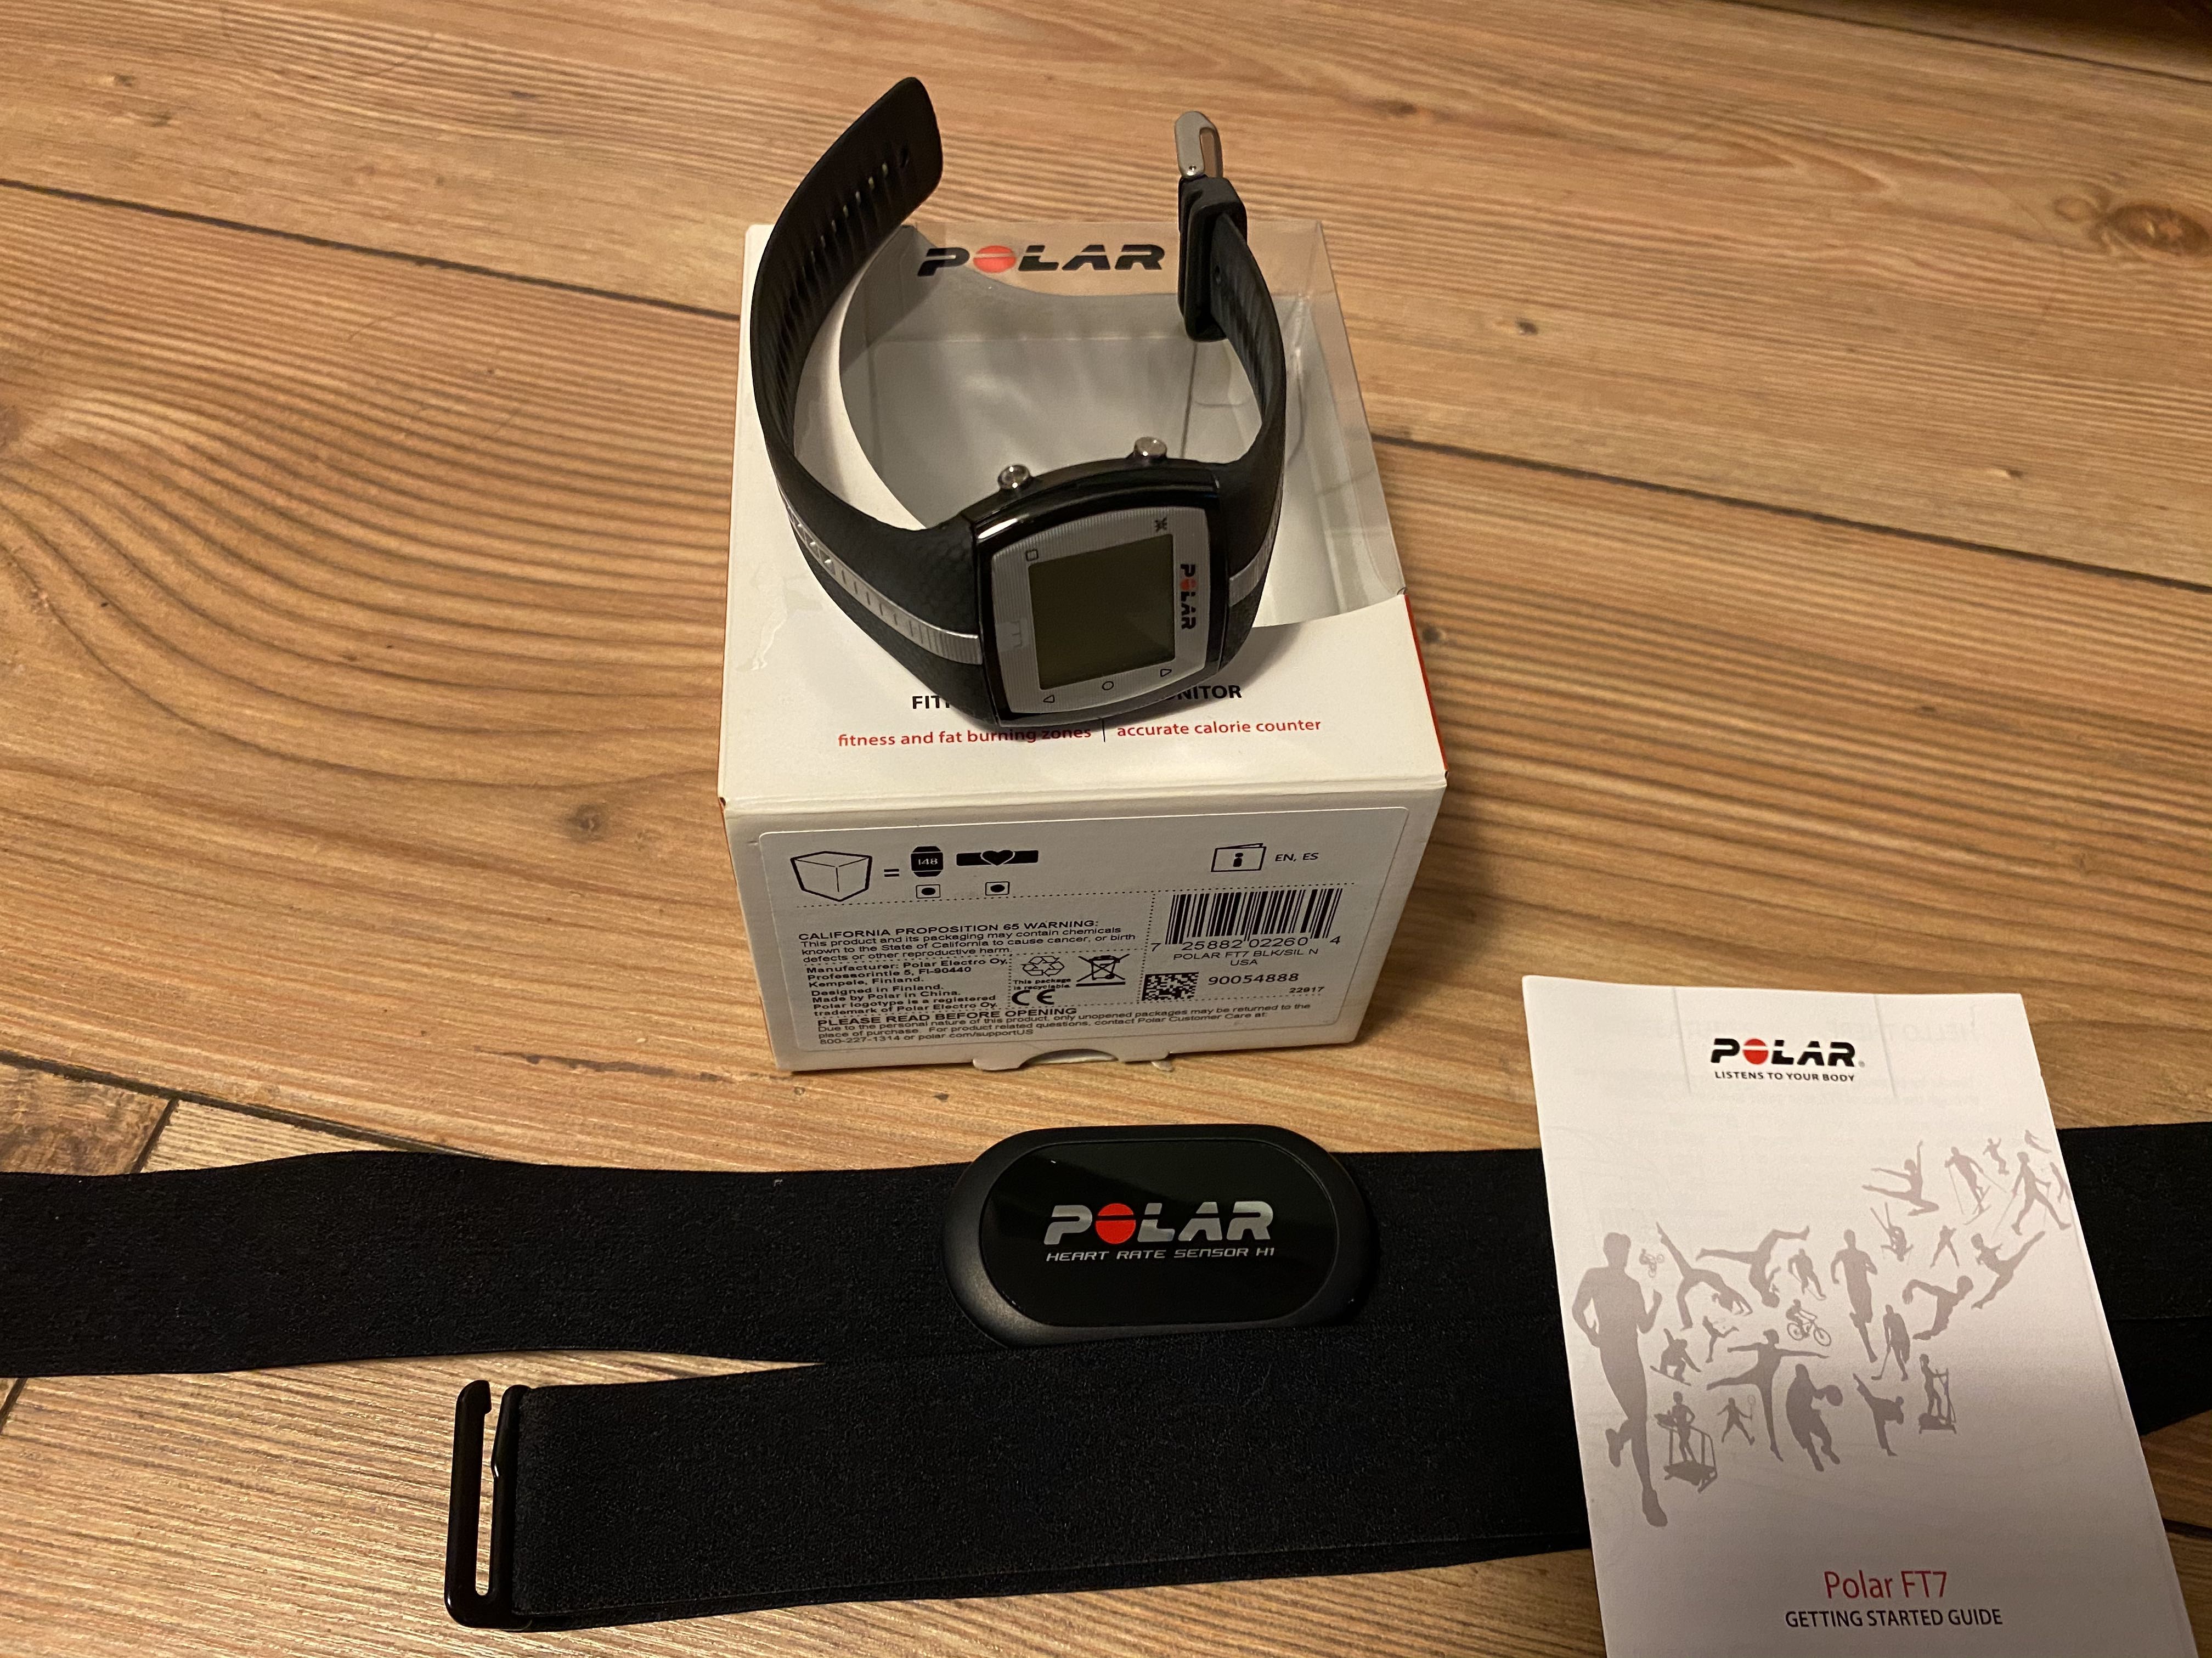 heart rate monitor and calorie counter